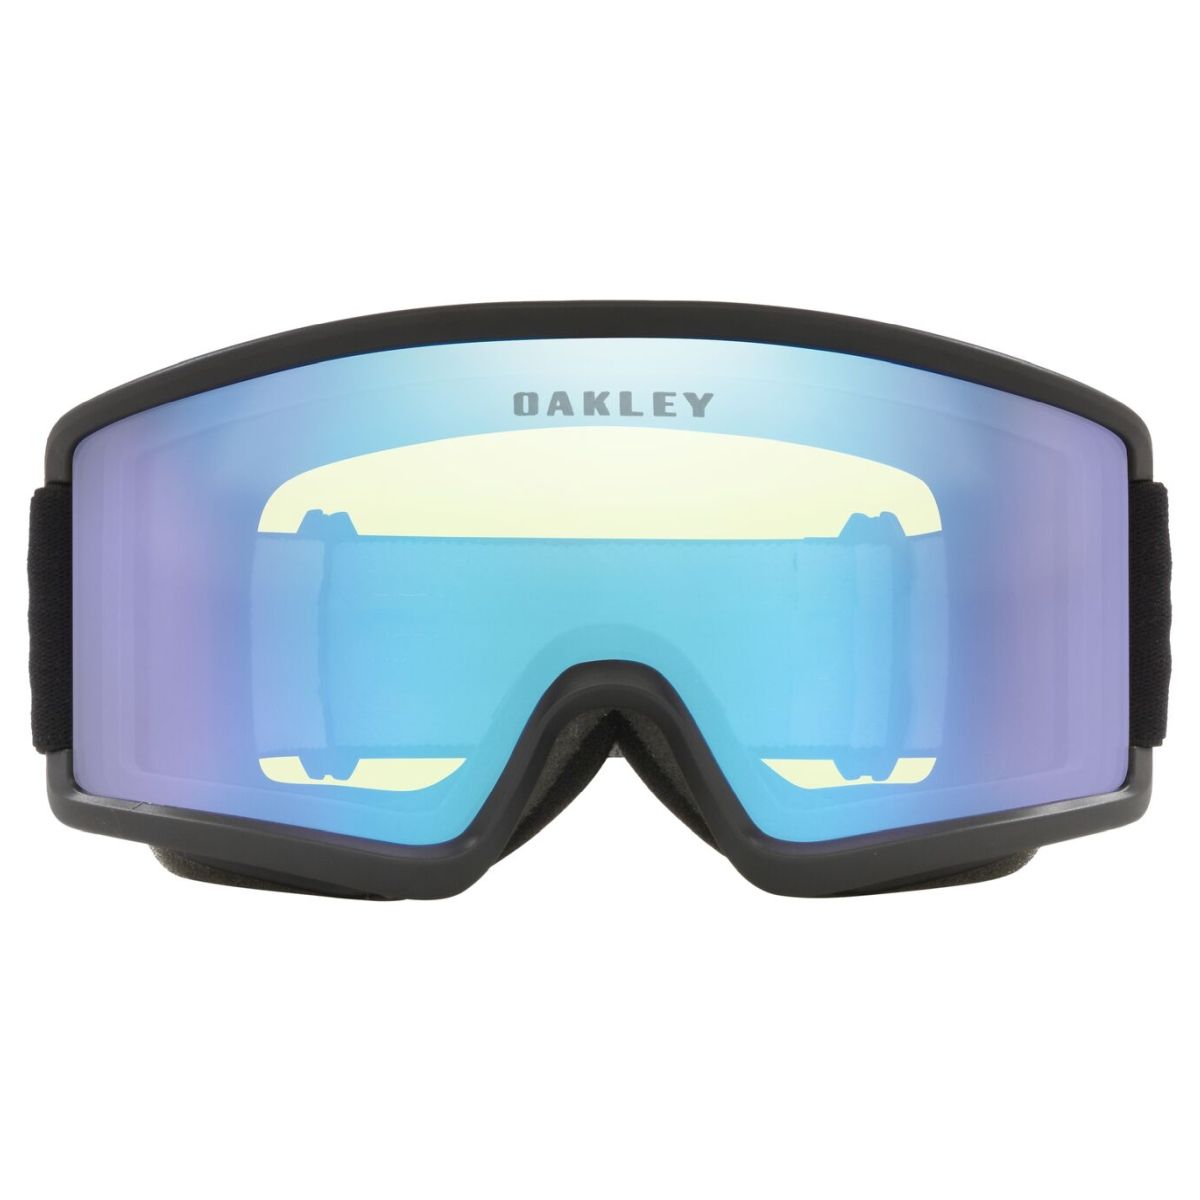 OAKLEY TARGET LINE S SNOW GOGGLES 7122/04/00